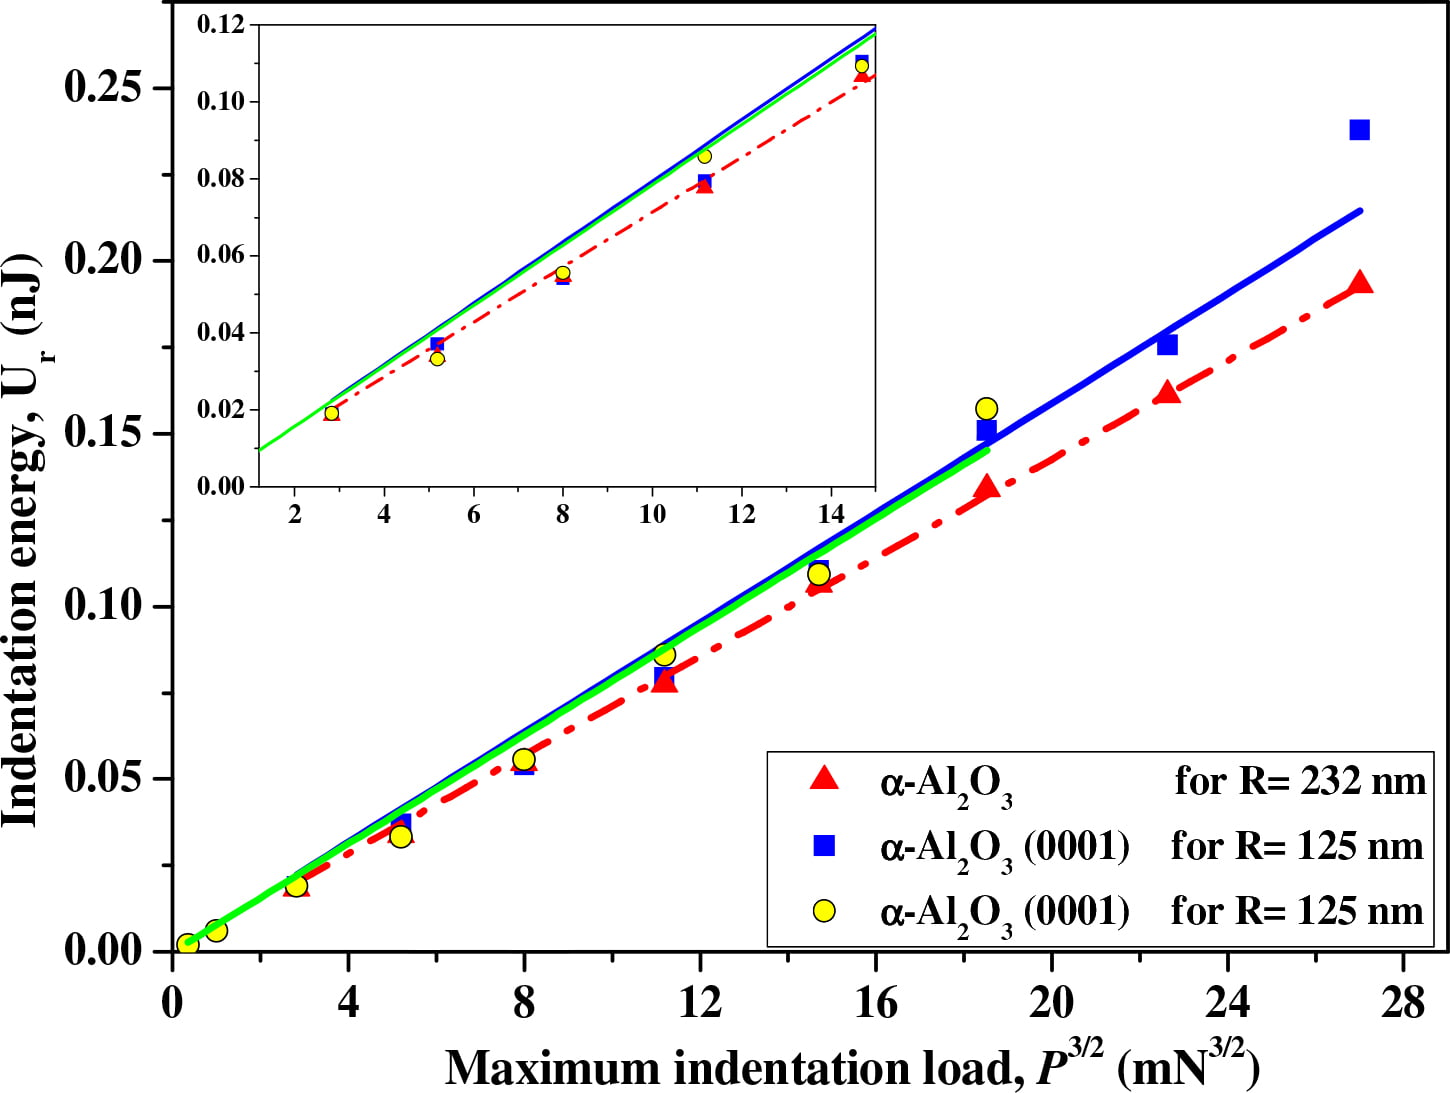 The relationship between Ur and 3/2 Pmax for α-Al2O3 and α-Al2O3(0001) under different indenter tip radii. The inset is magnified from the small indentation load regime.